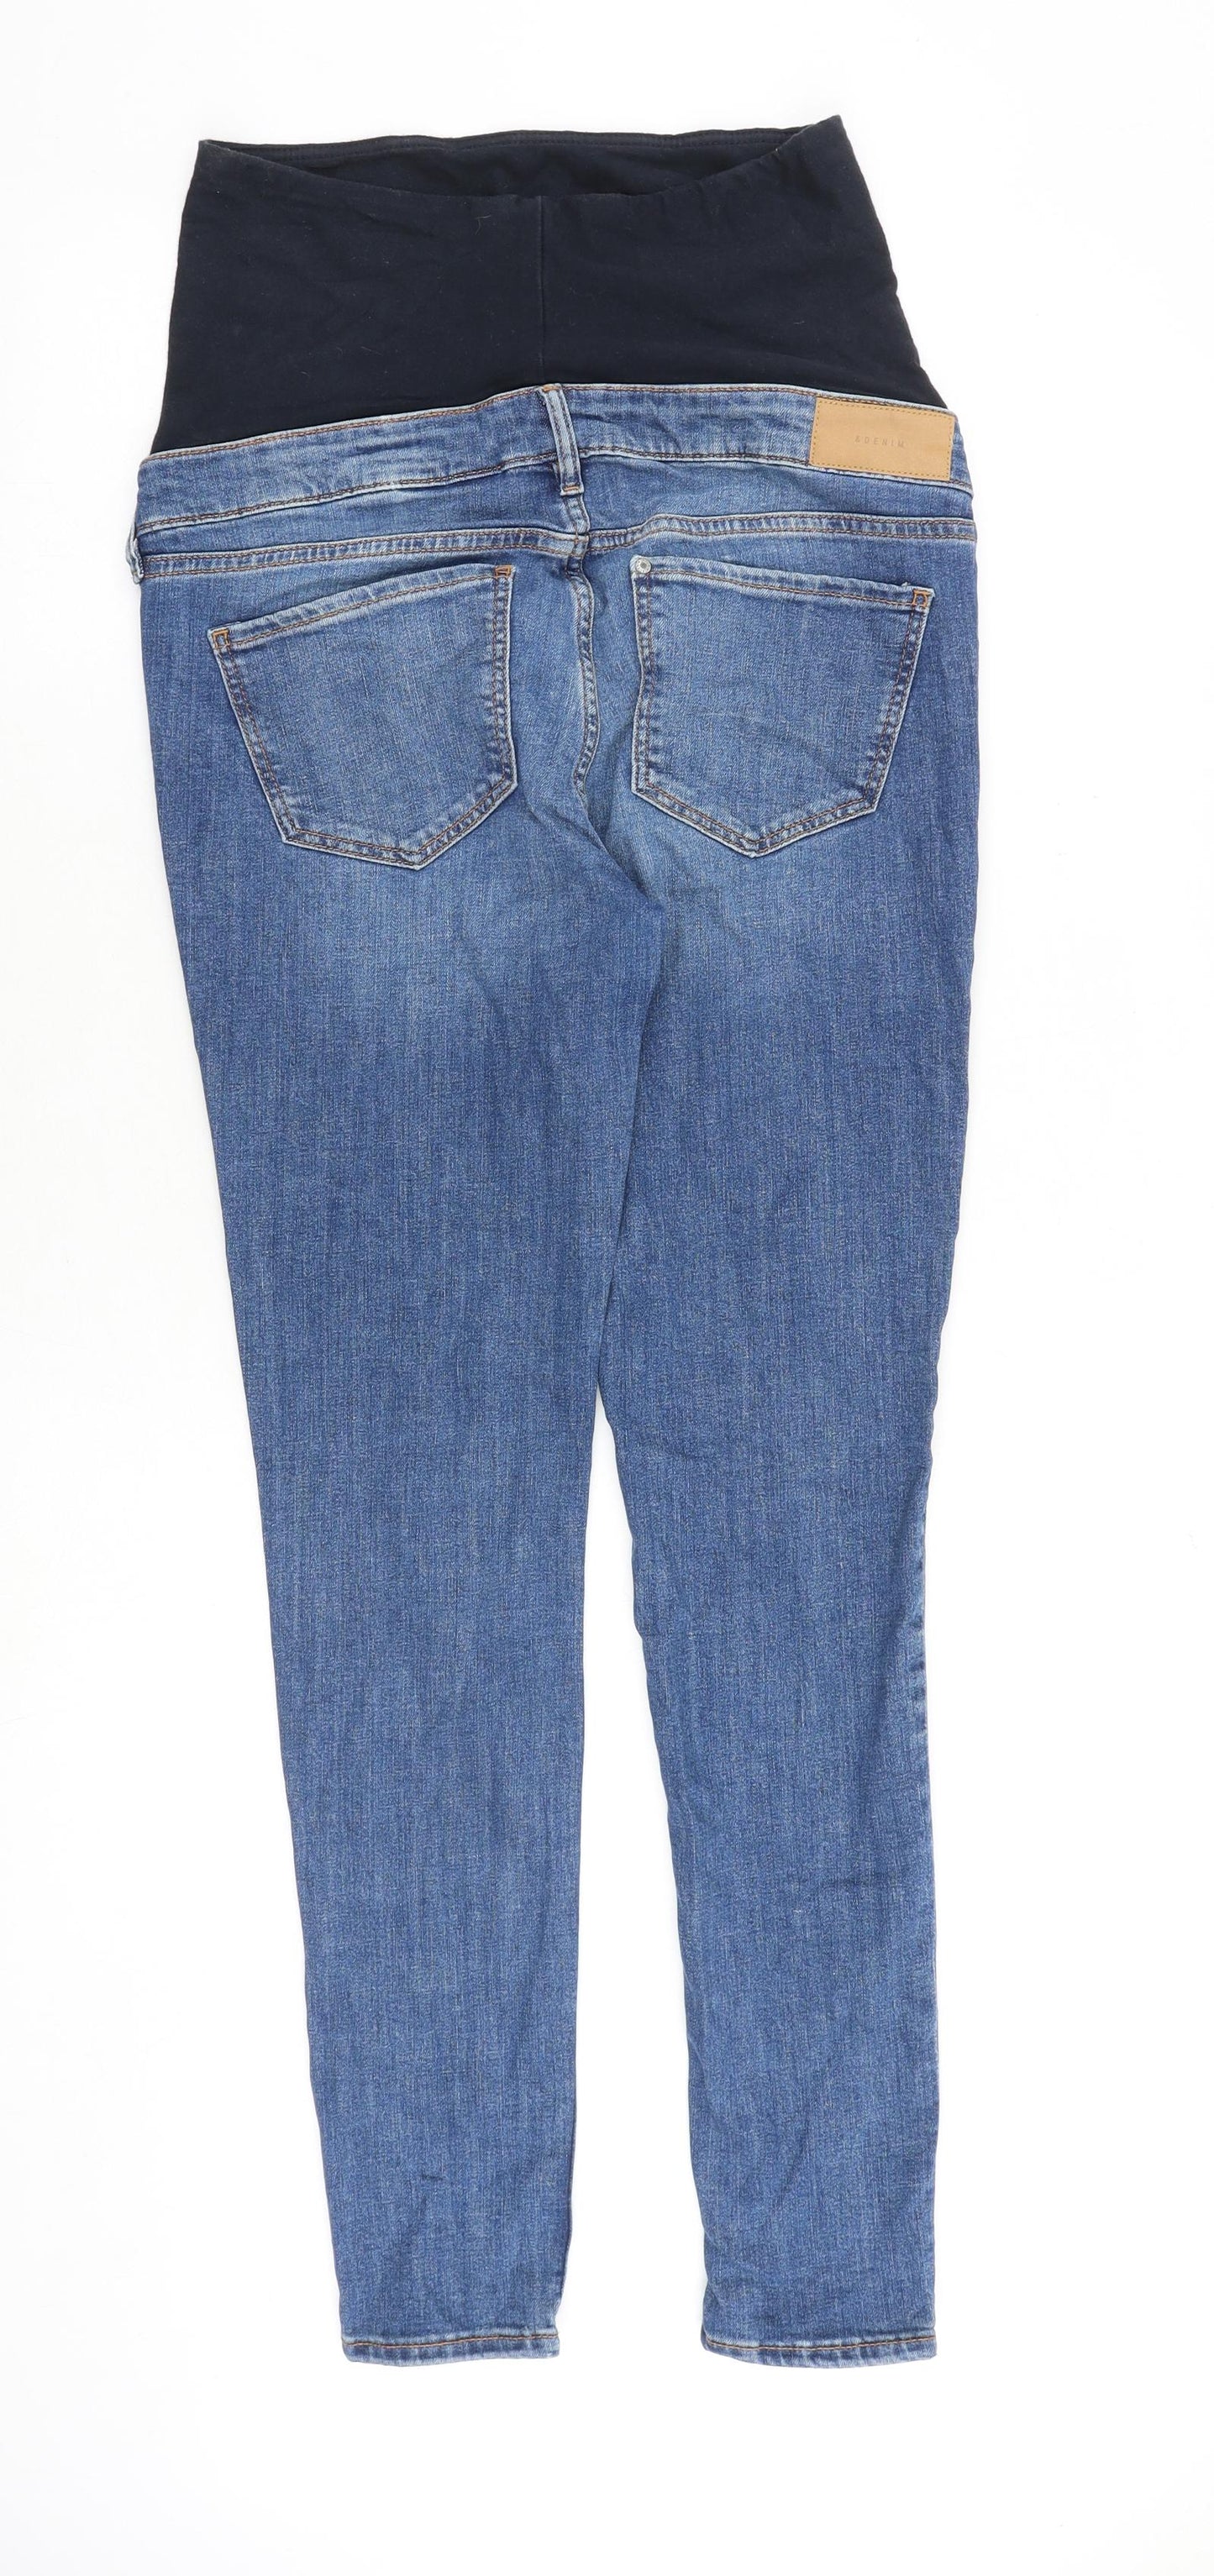 H&M Womens Blue Cotton Skinny Jeans Size 10 Regular Button